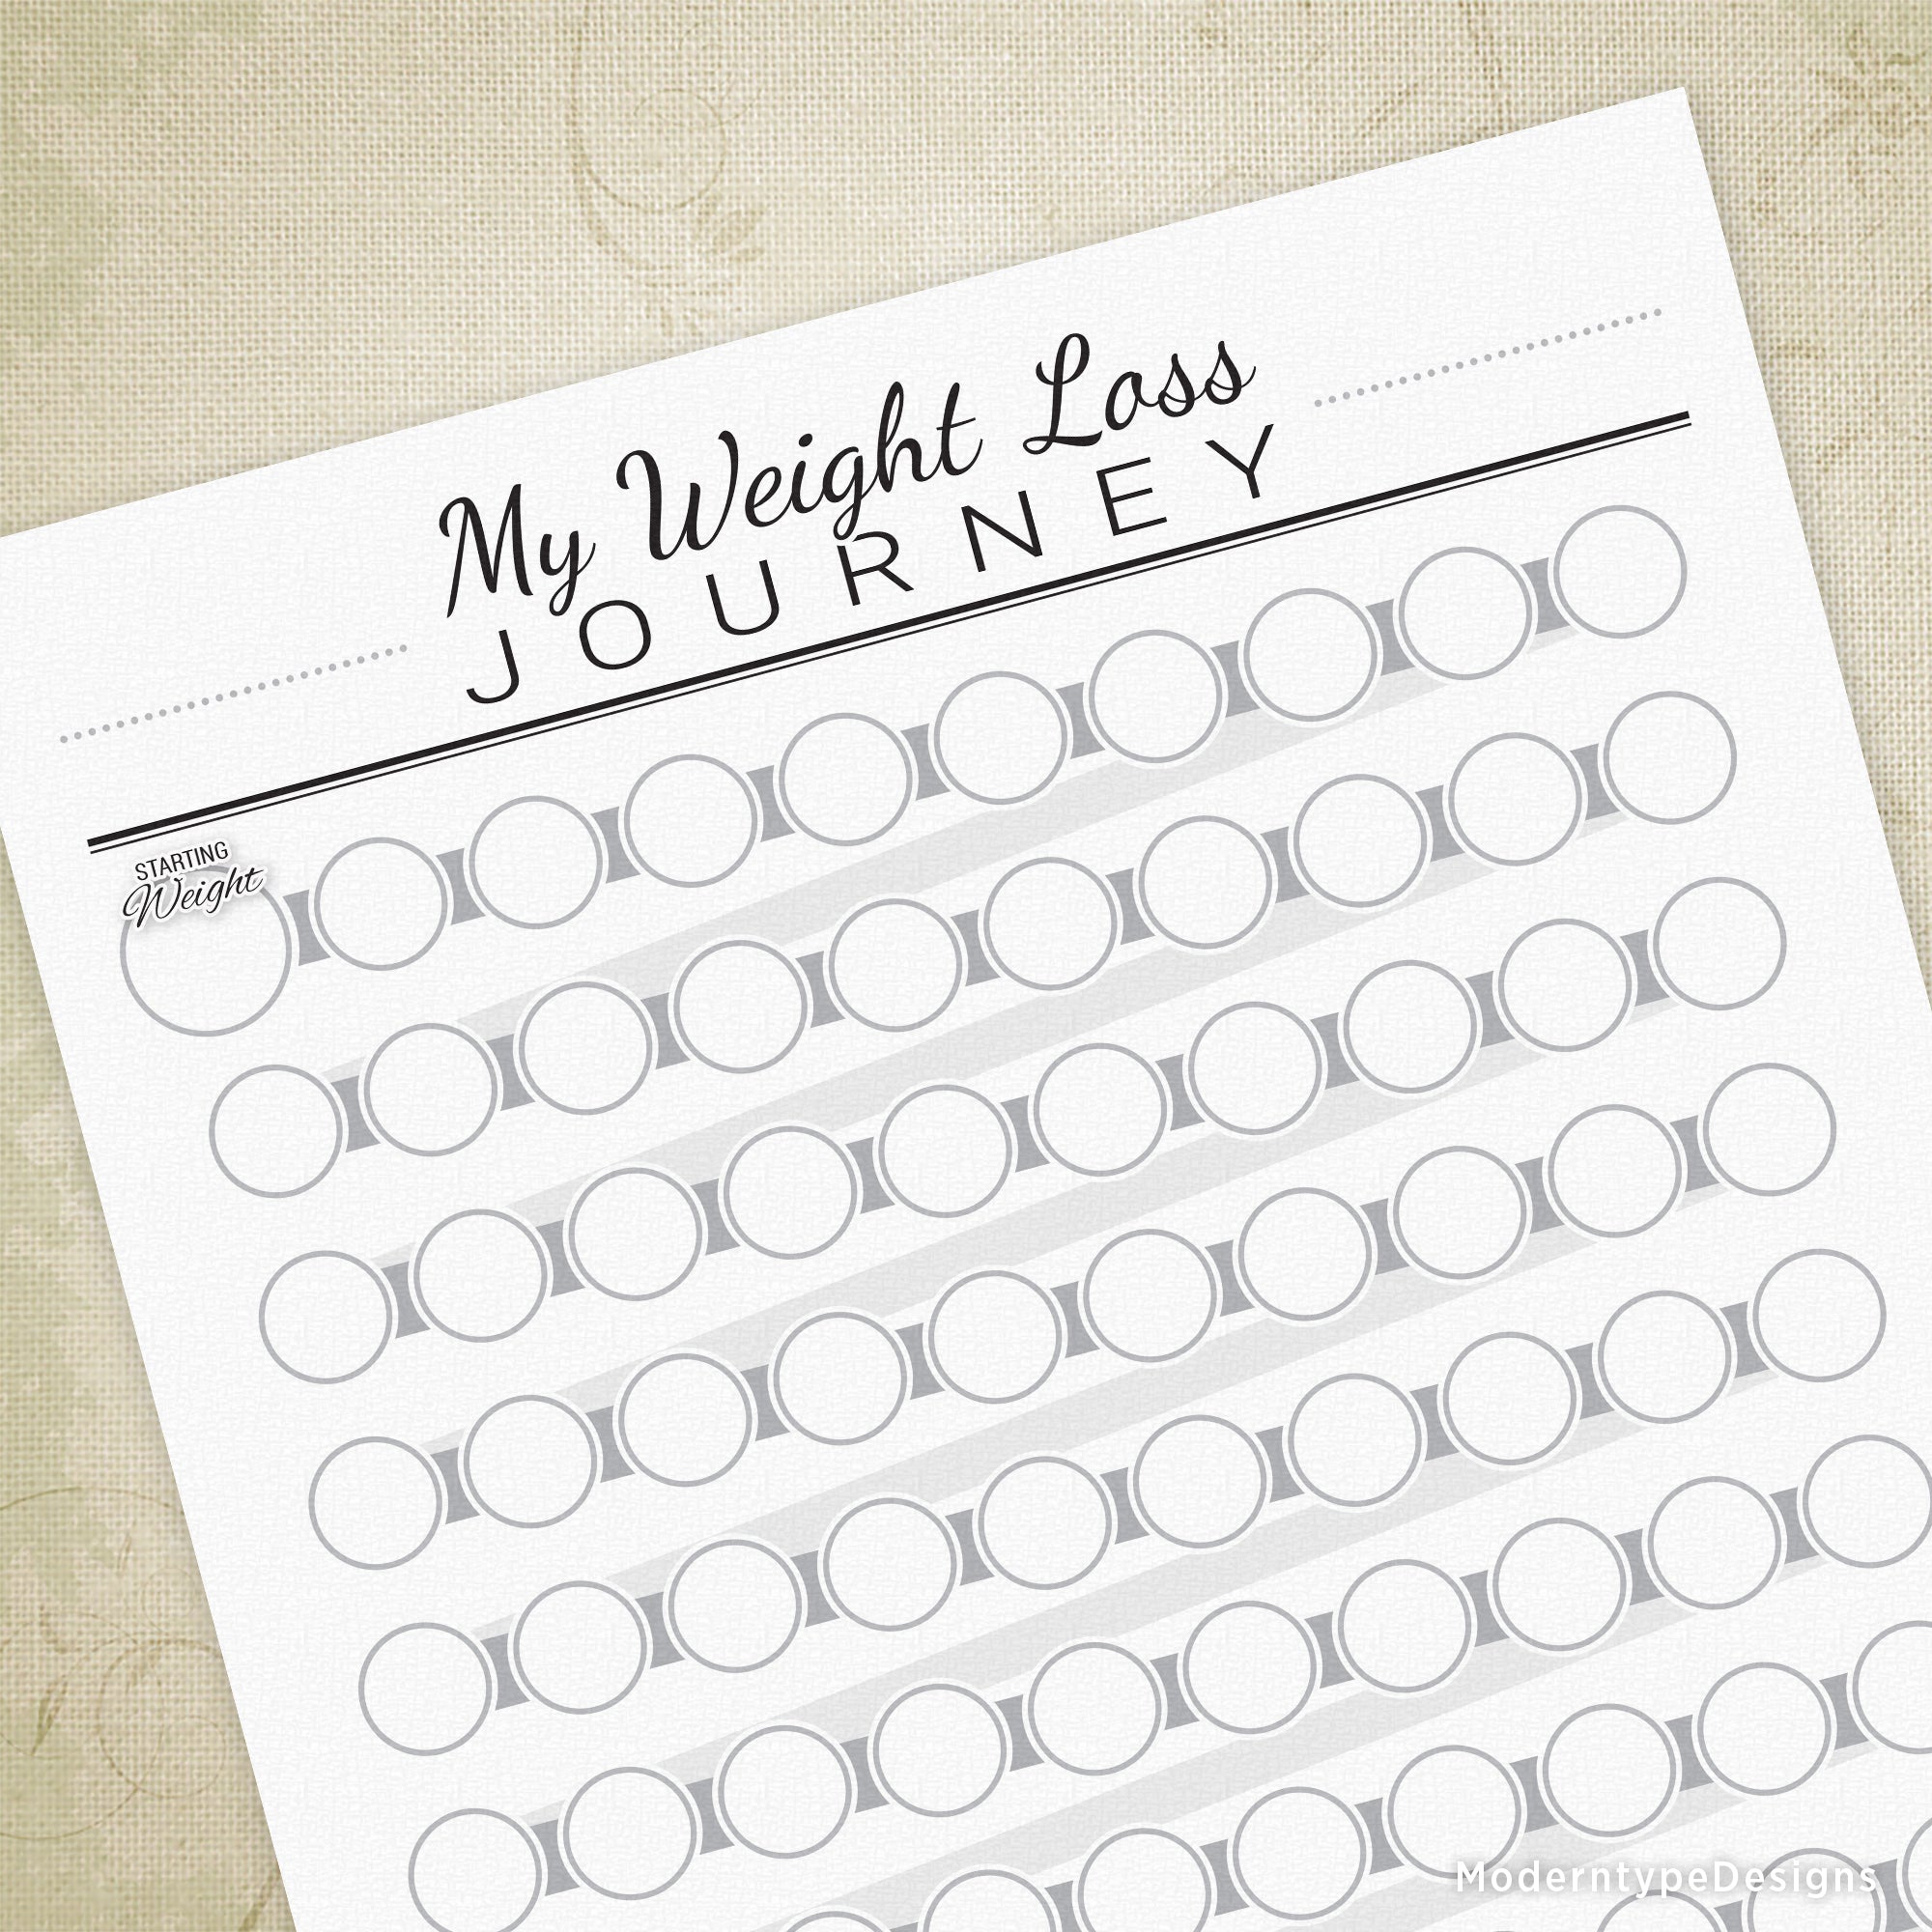 My Weight Loss Journey Printable